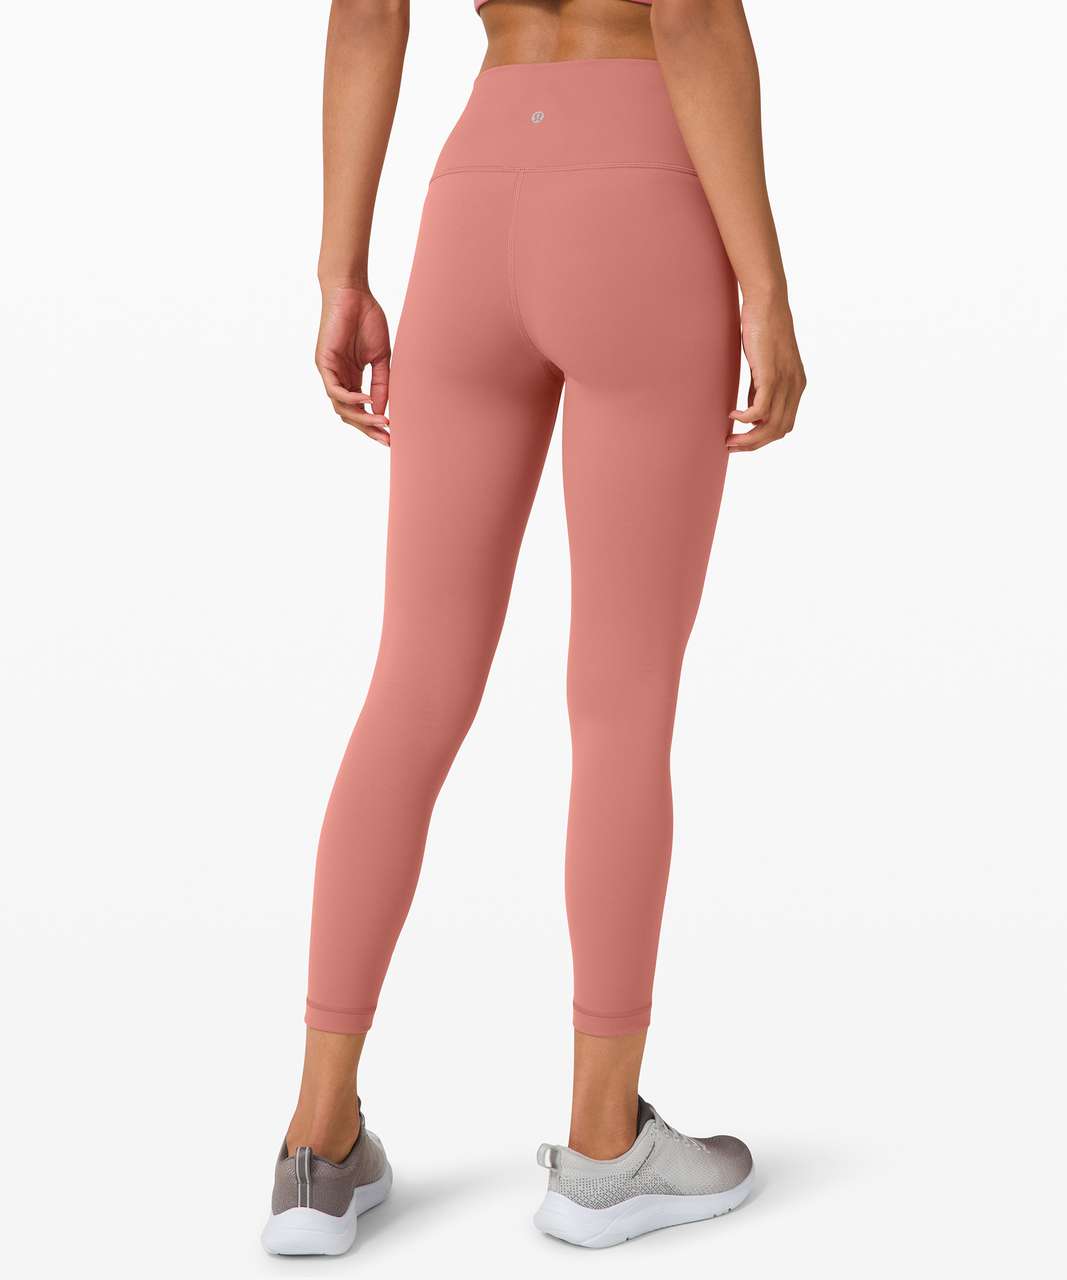 Lululemon Wunder Train High-Rise Tight 25" - Brier Rose (First Release)